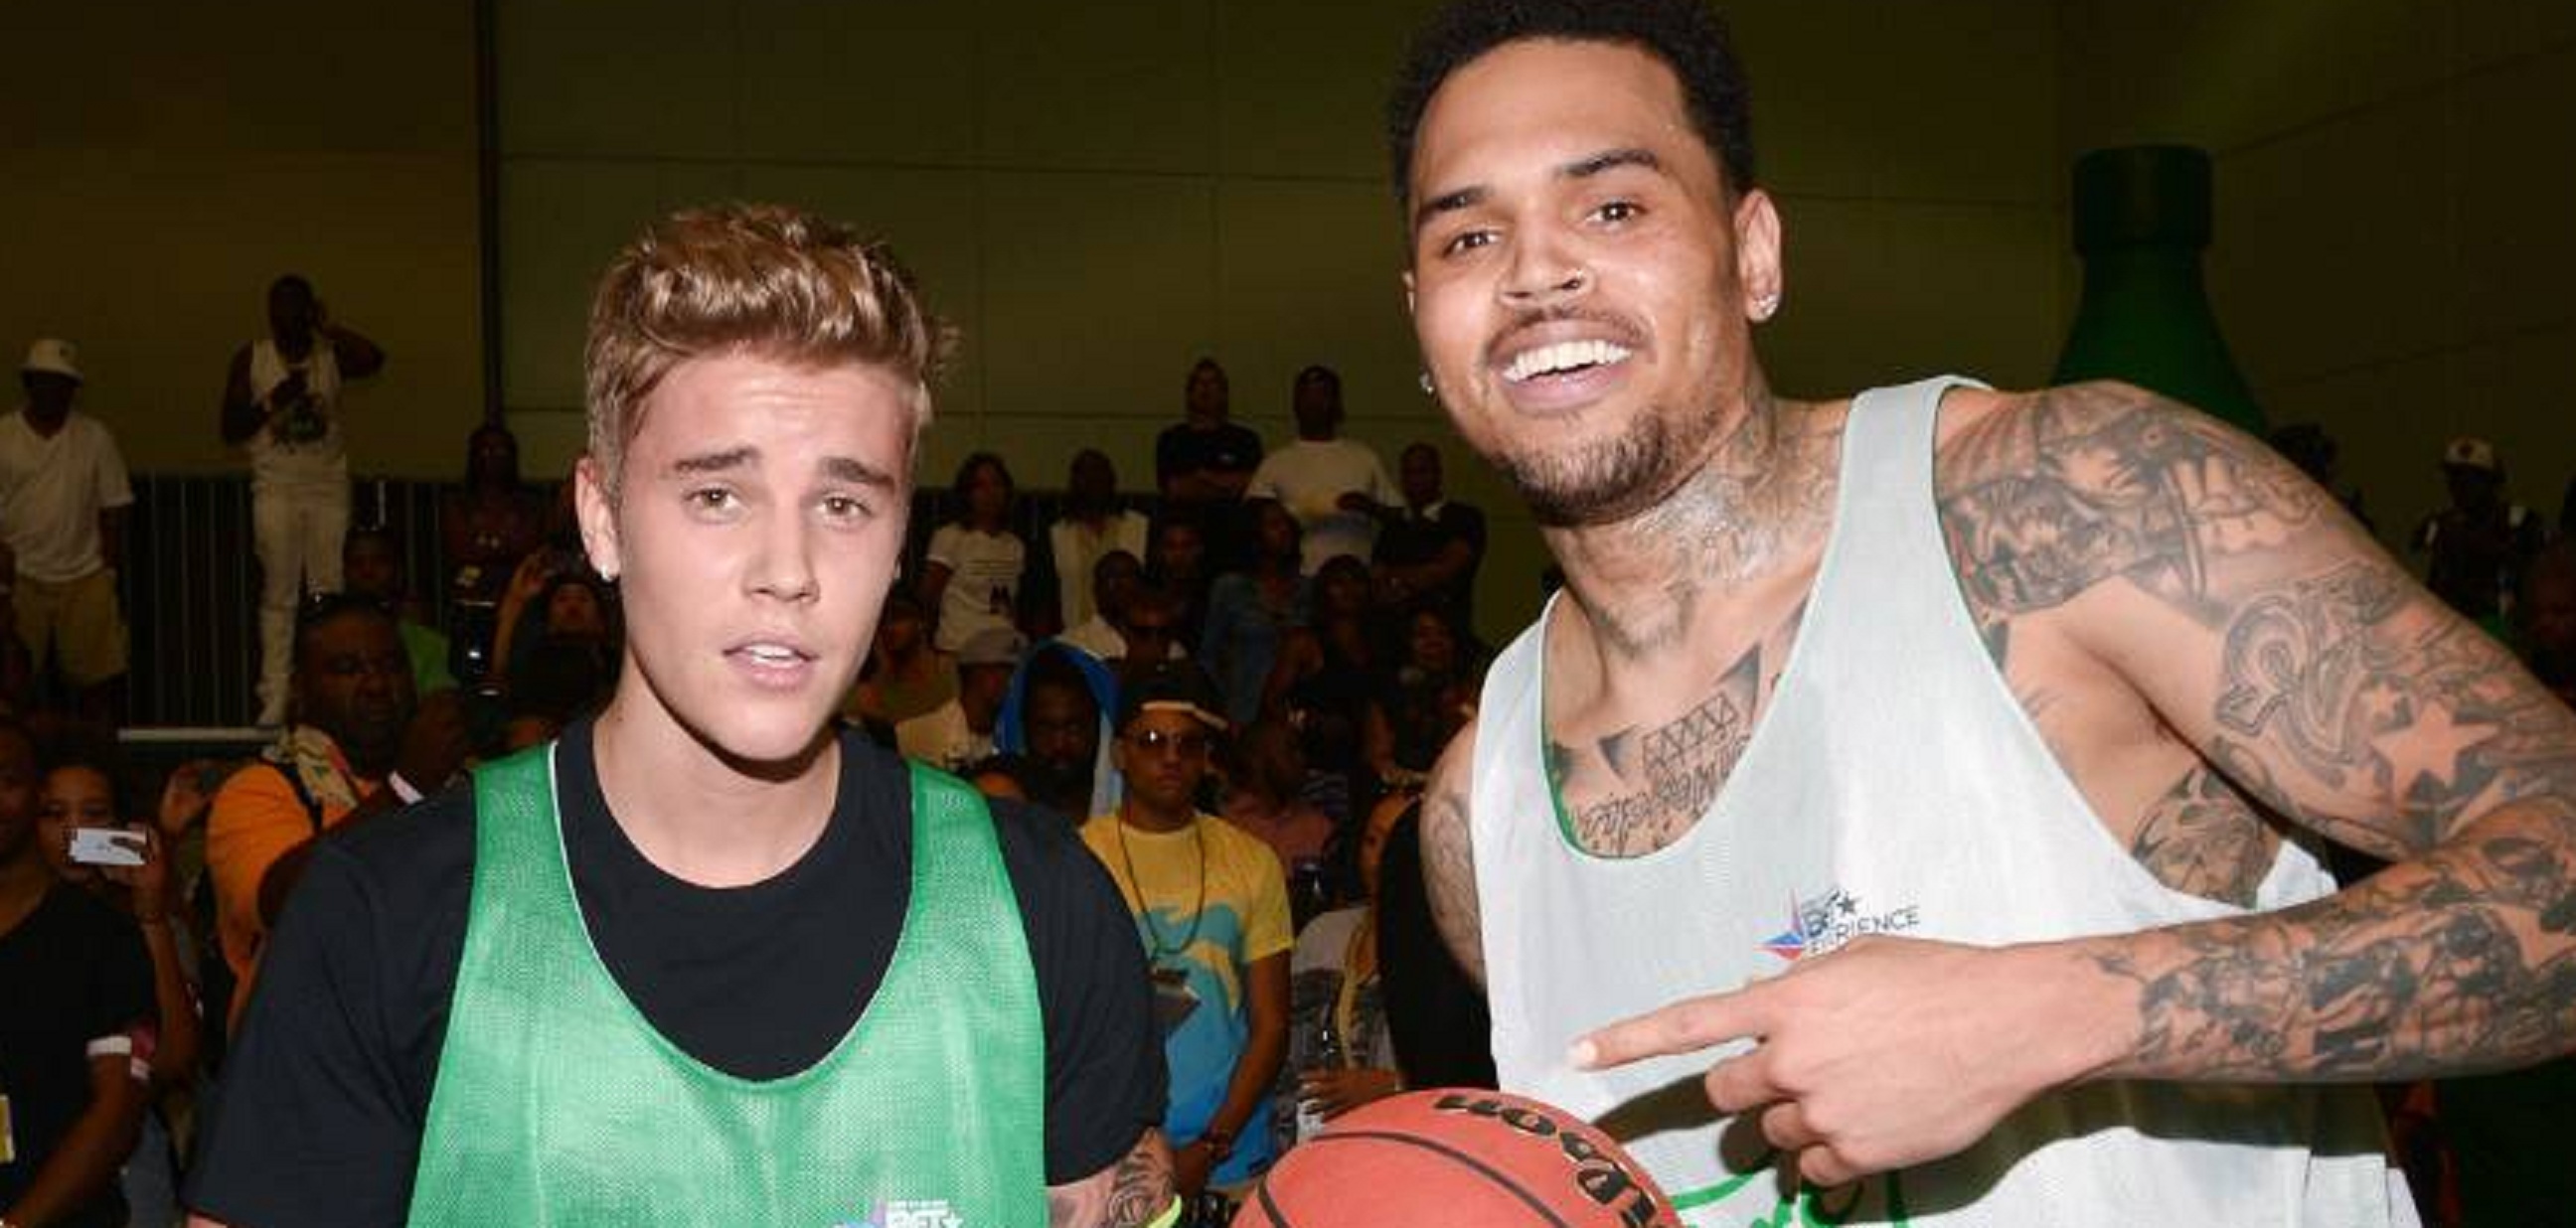 Justin Bieber: “Chris Brown Is The Best Entertainer Of All Time”